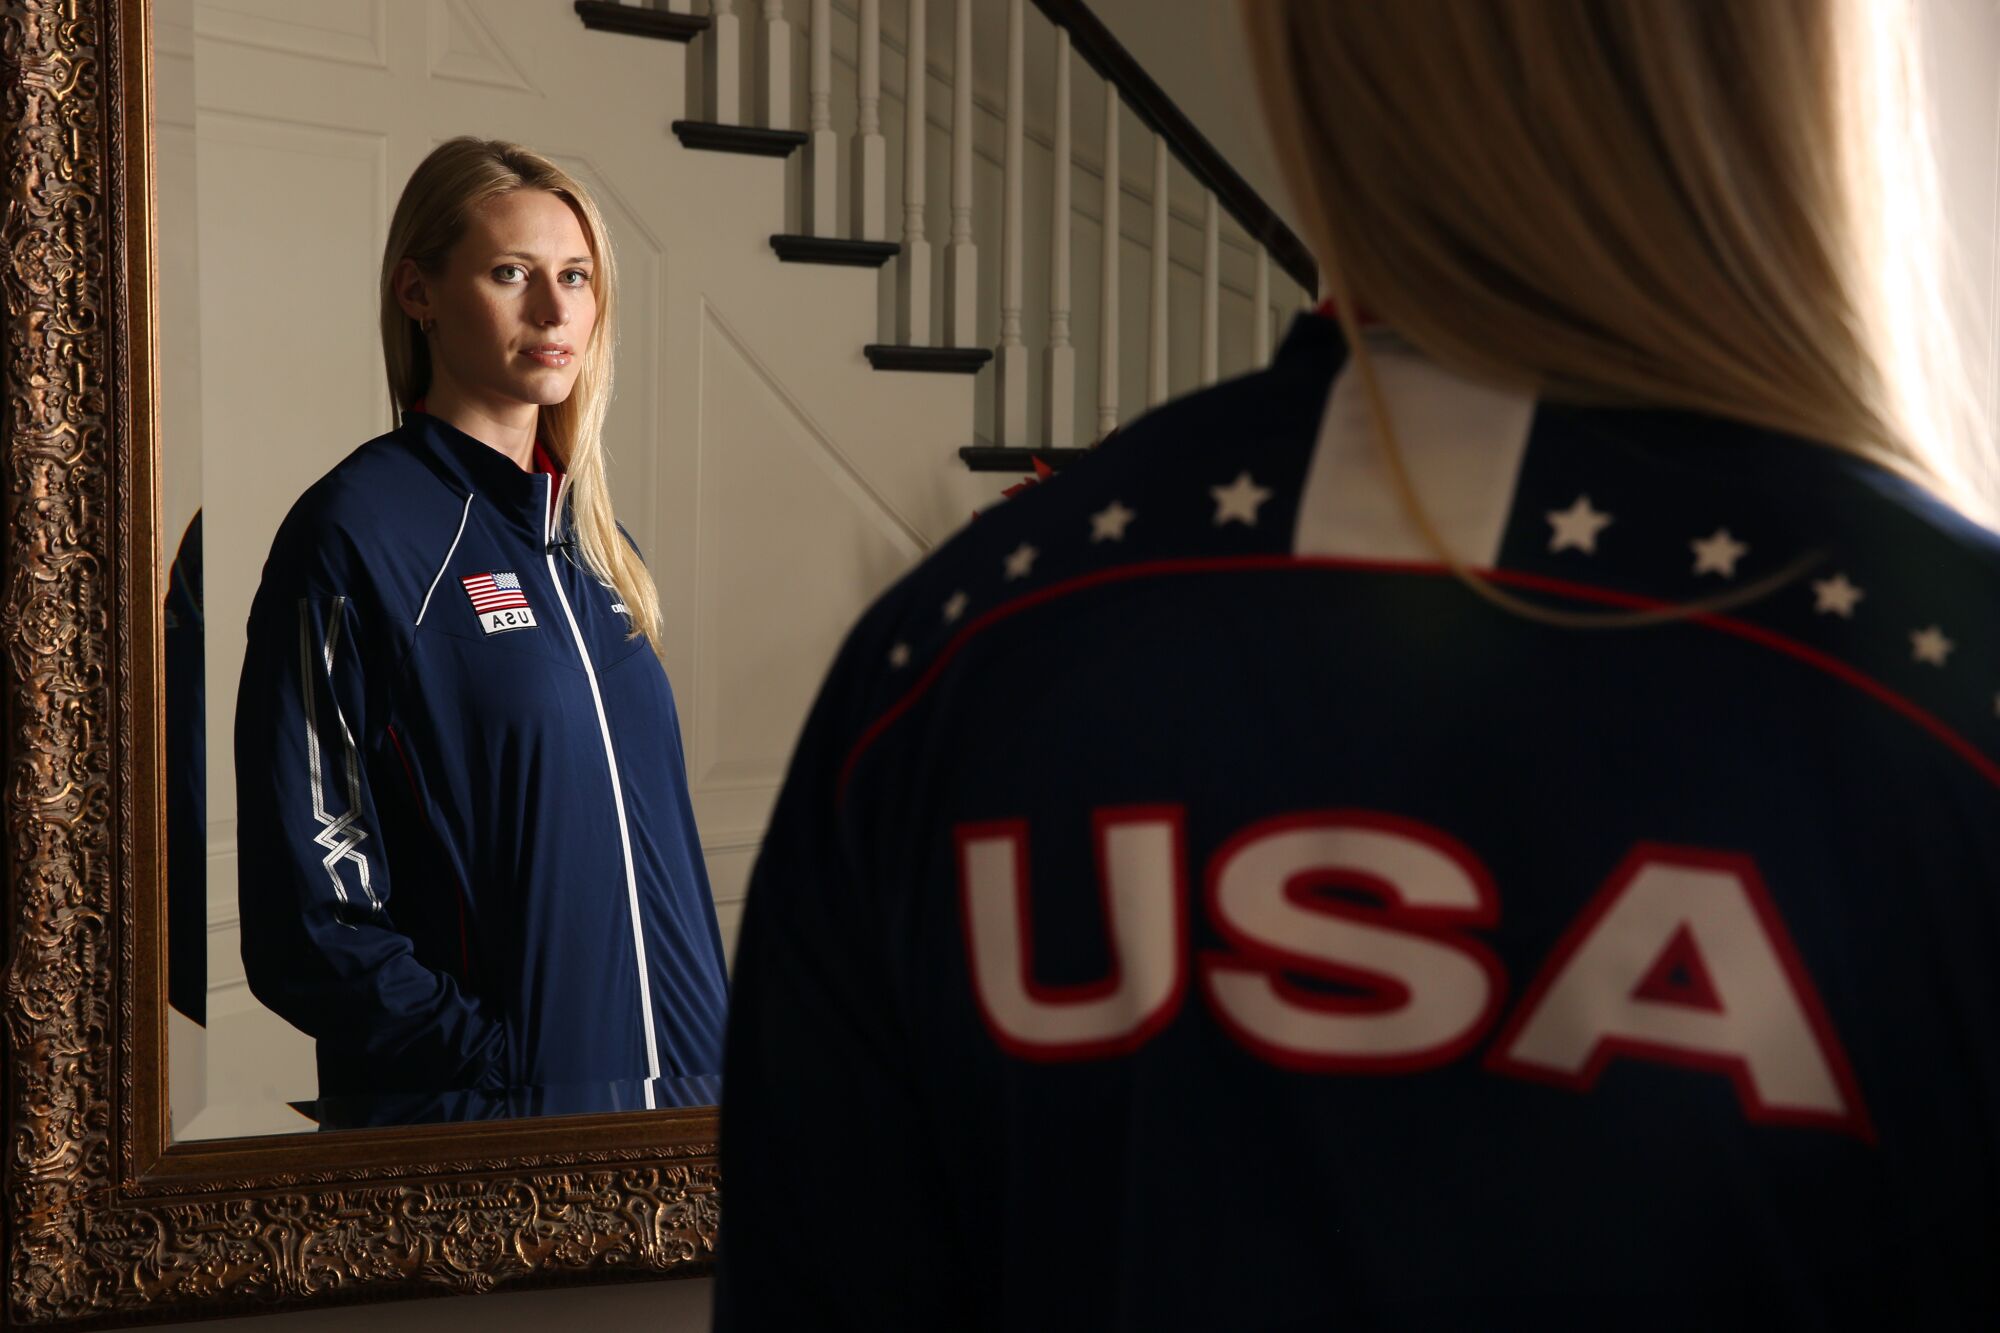 Hayley Hodson stands in her parents' Newport Beach home while wearing her U.S. Women's National Team jacket.